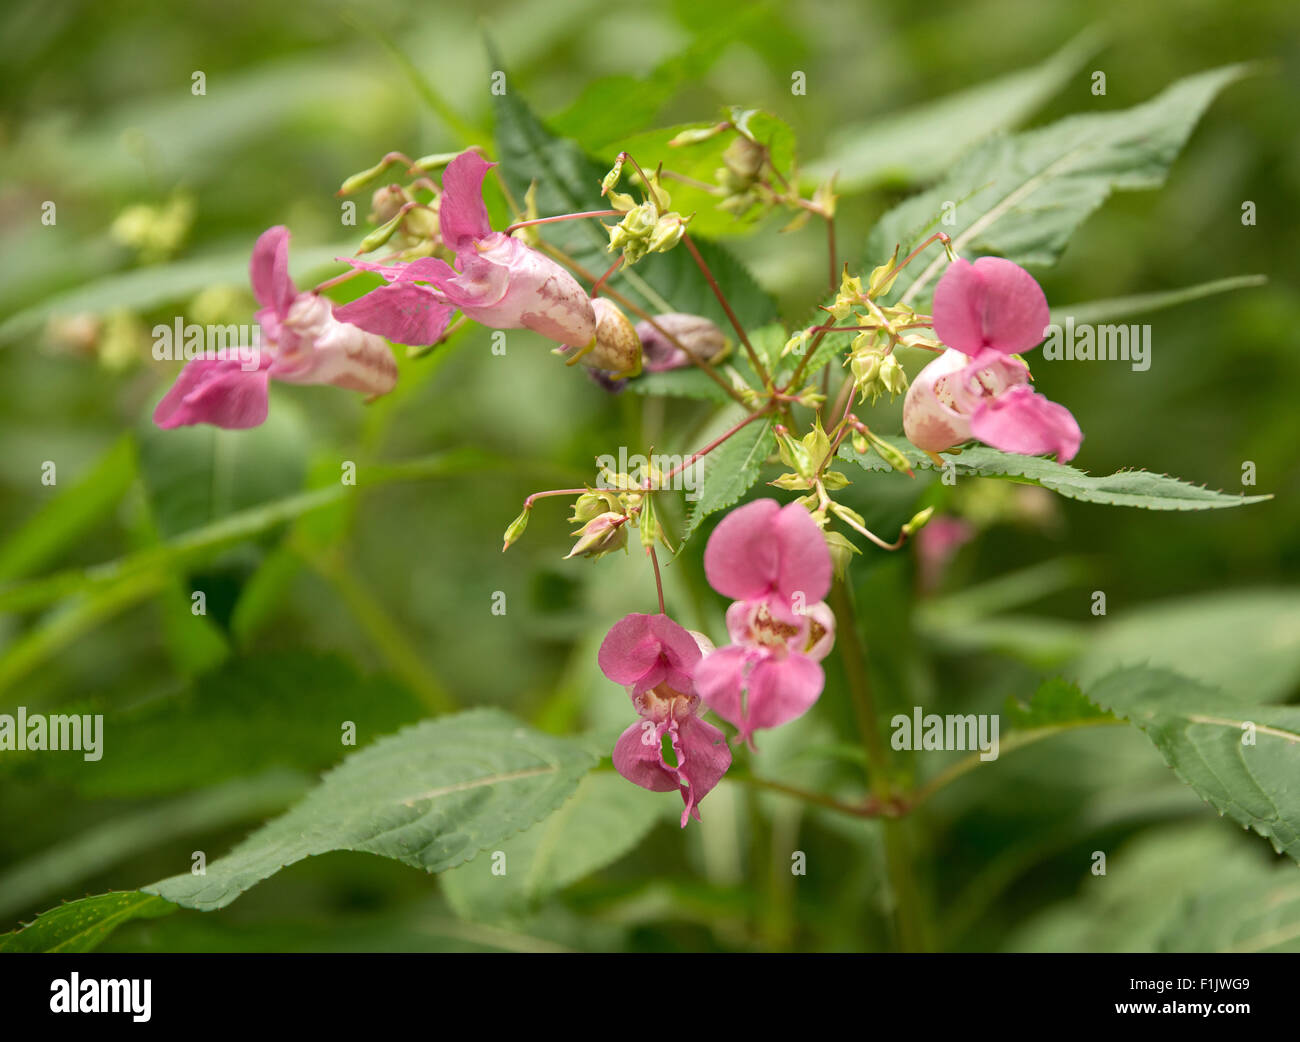 flower named Policemans helmet in green leavy ambiance Stock Photo